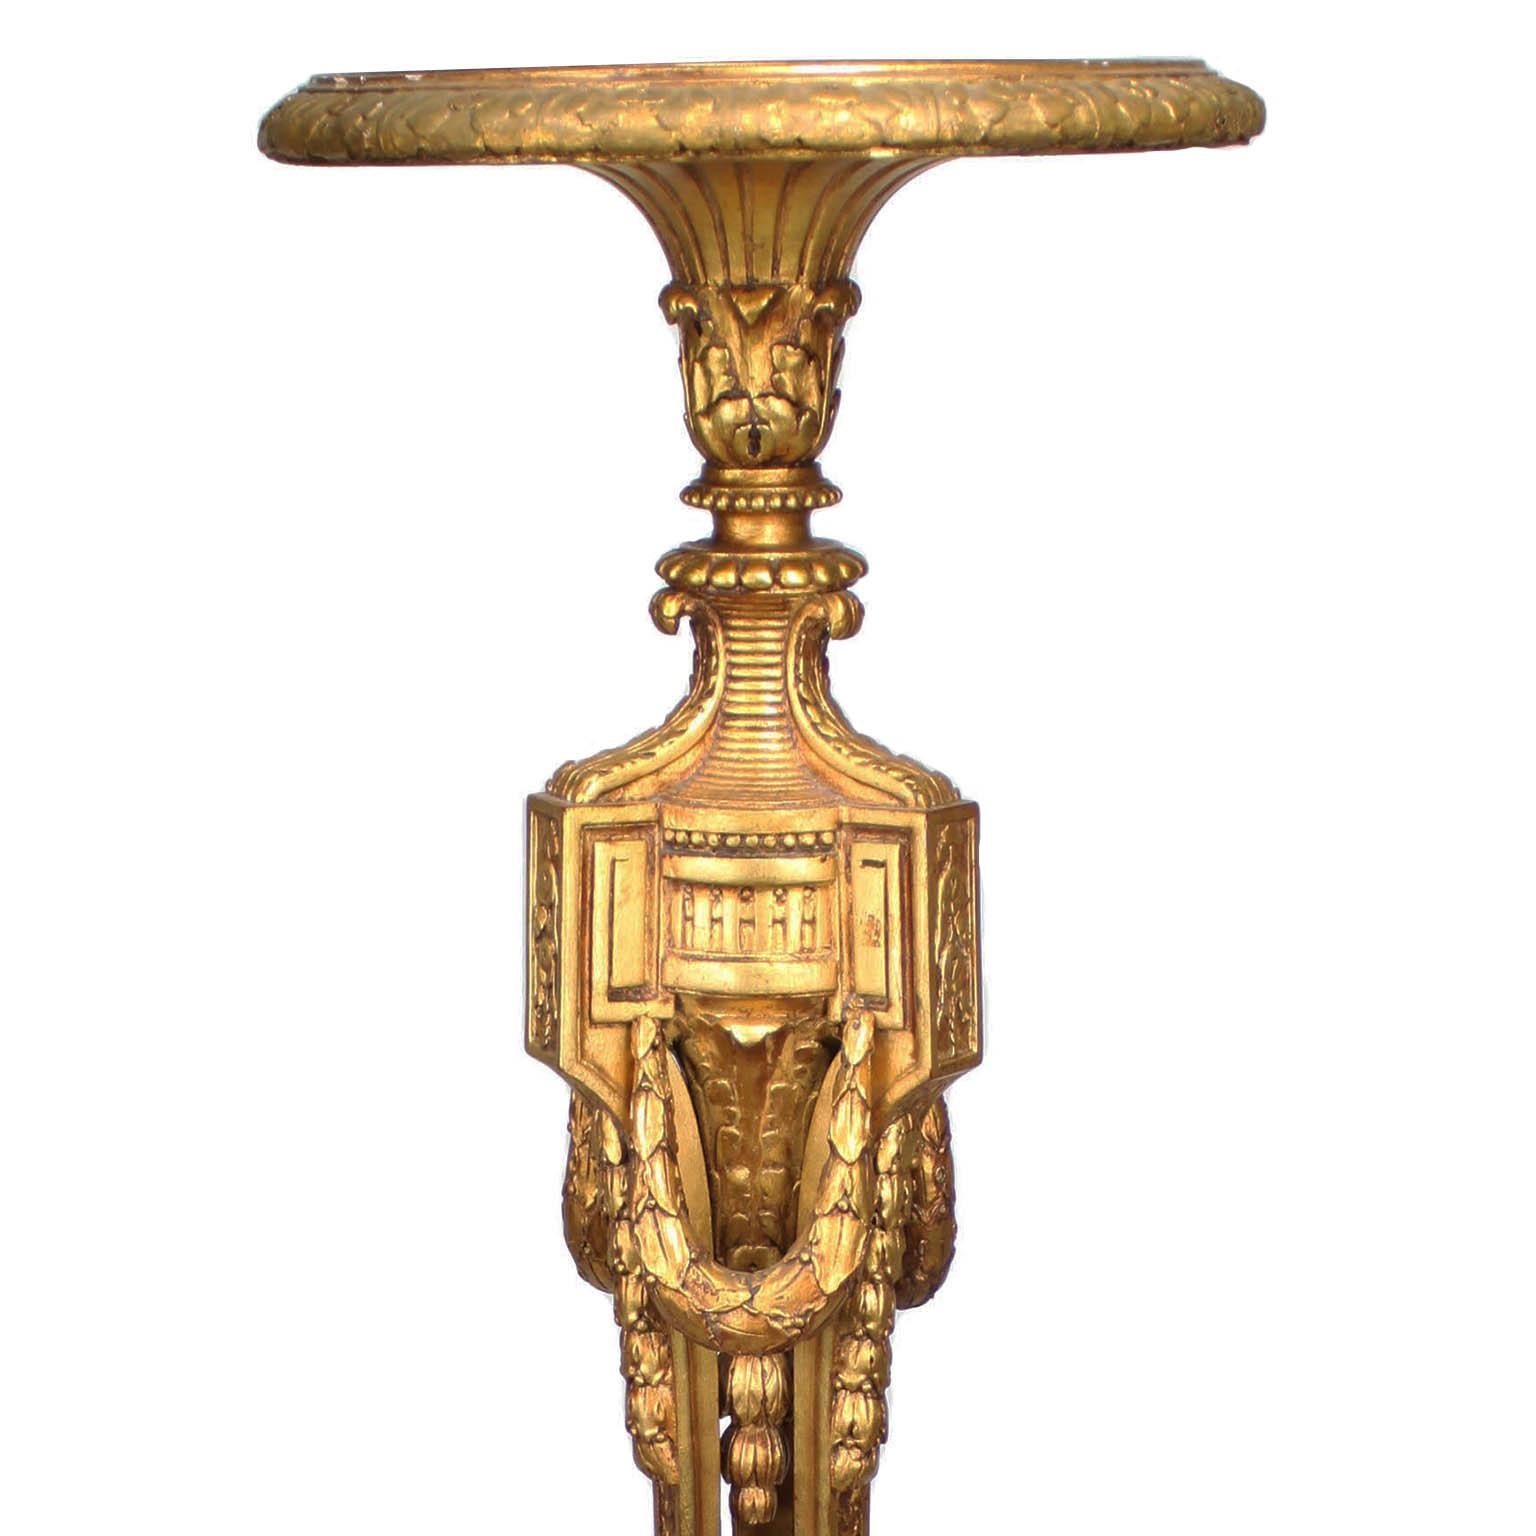 A French Belle Époque Louis XVI Style Giltwood Carved Torchere (Torchière) Pedestal Stand, attributed to François Linke (1855-1946), Index number 1546 
Paris, 1907. The slender tripod body, surmounted with laurel wreaths, rosettes and scrolls and a